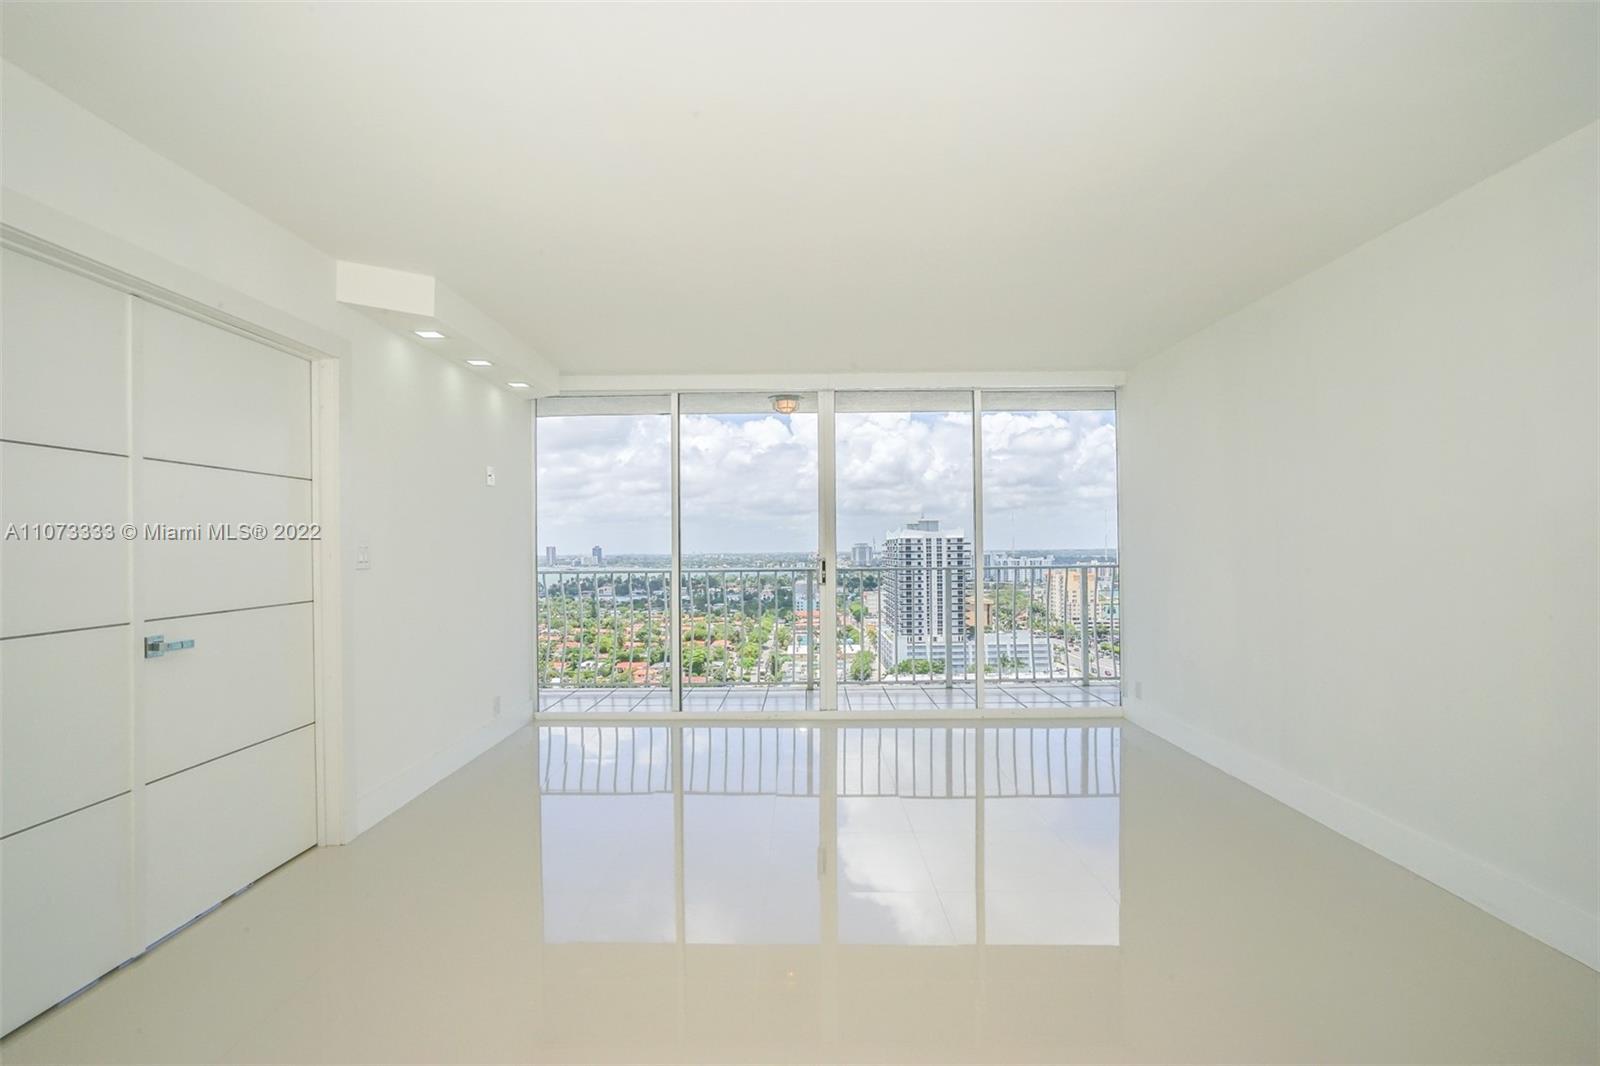 Beautiful designer's dream 2/2 condo, with 24x24 Italian imported rectified porcelain throughout, an